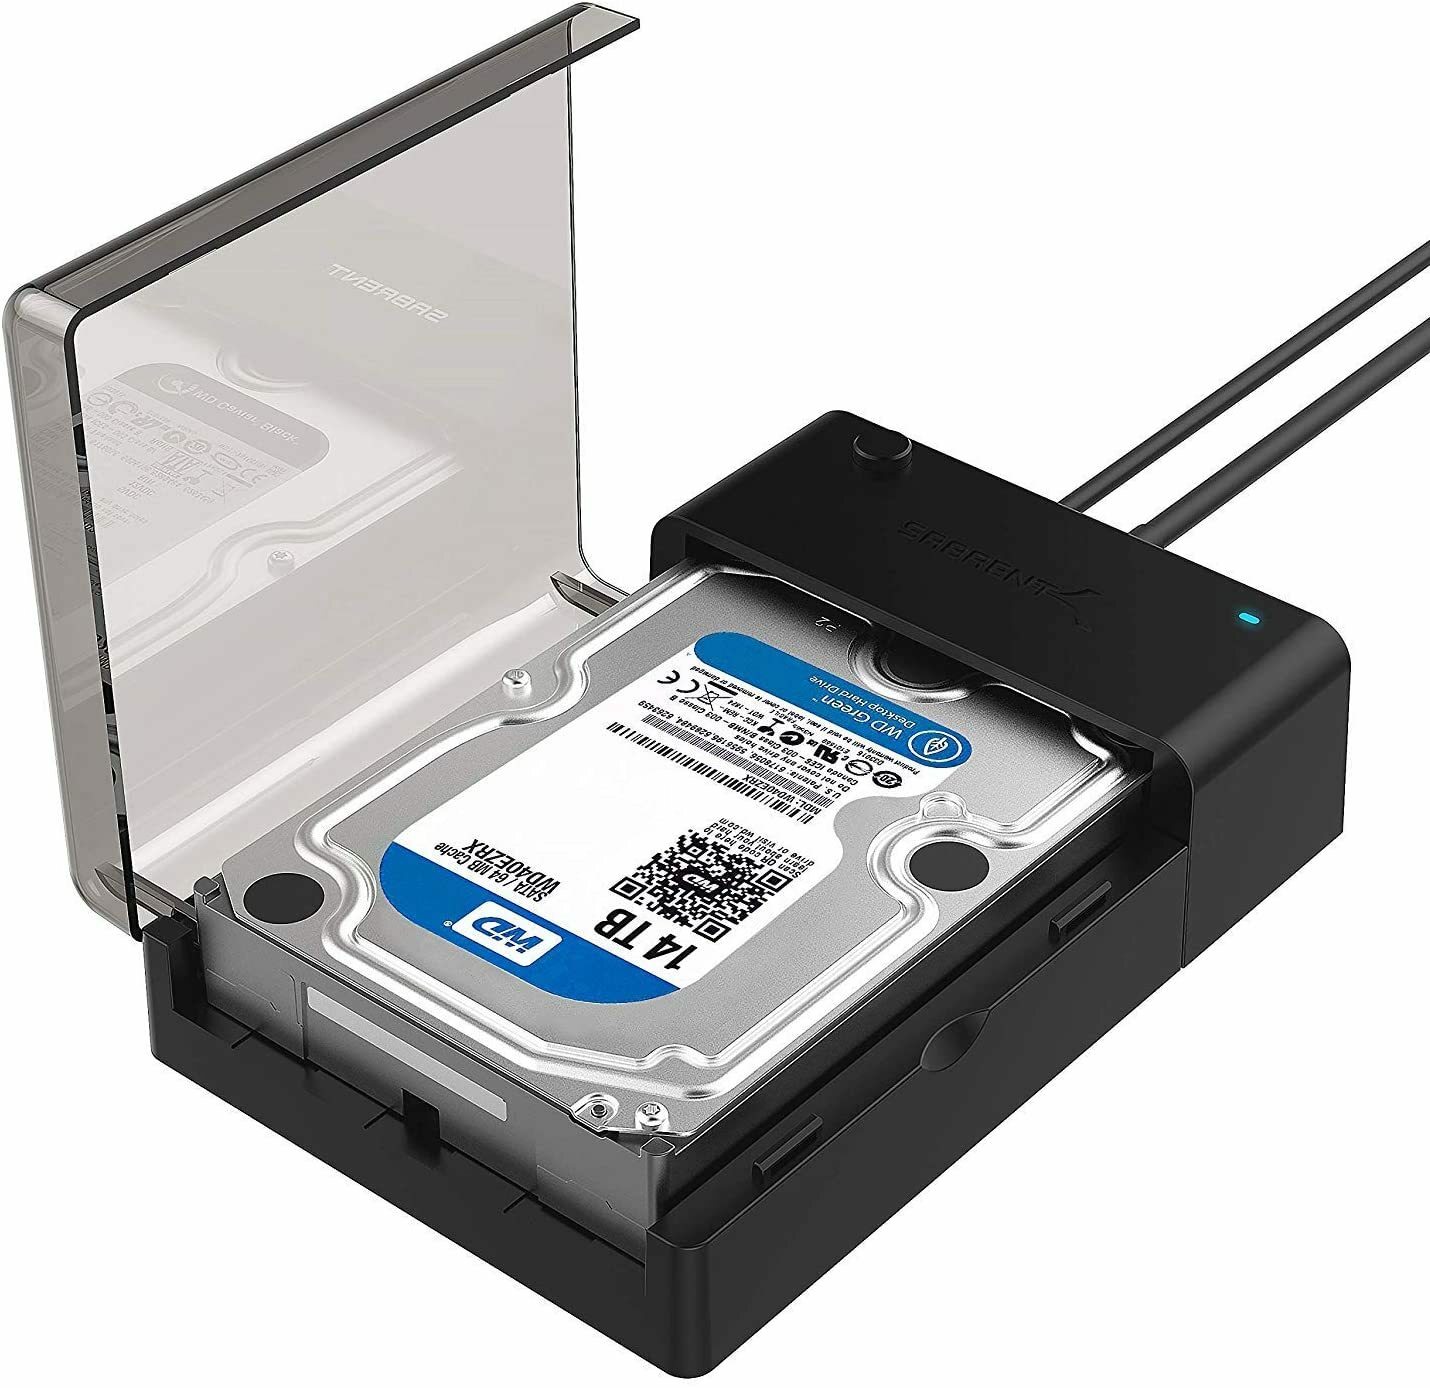 format terabyte drive for use with windows and mac